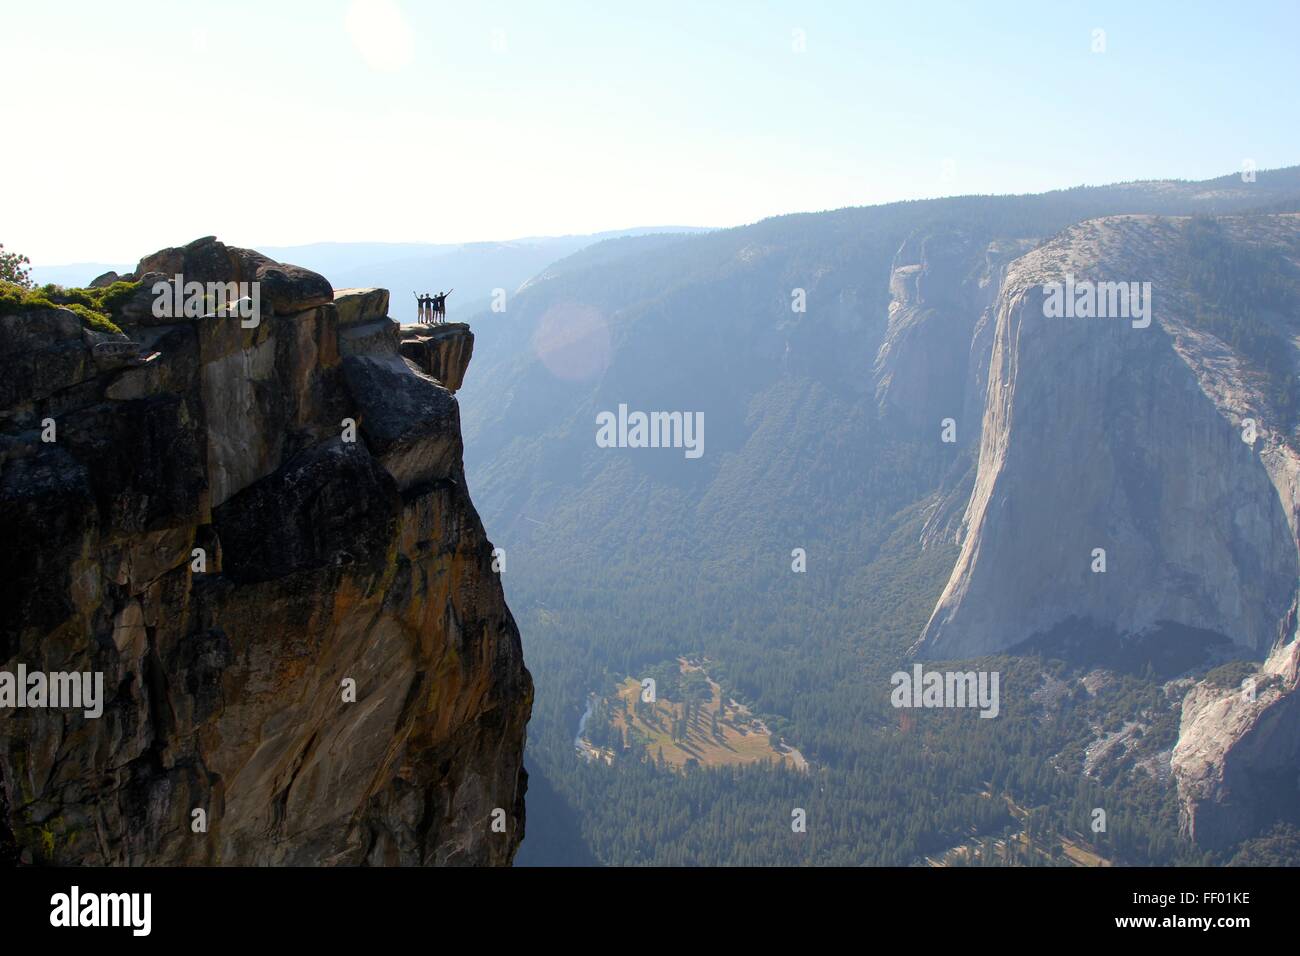 Four people raise their hands in celebration of making it to the top. Stock Photo